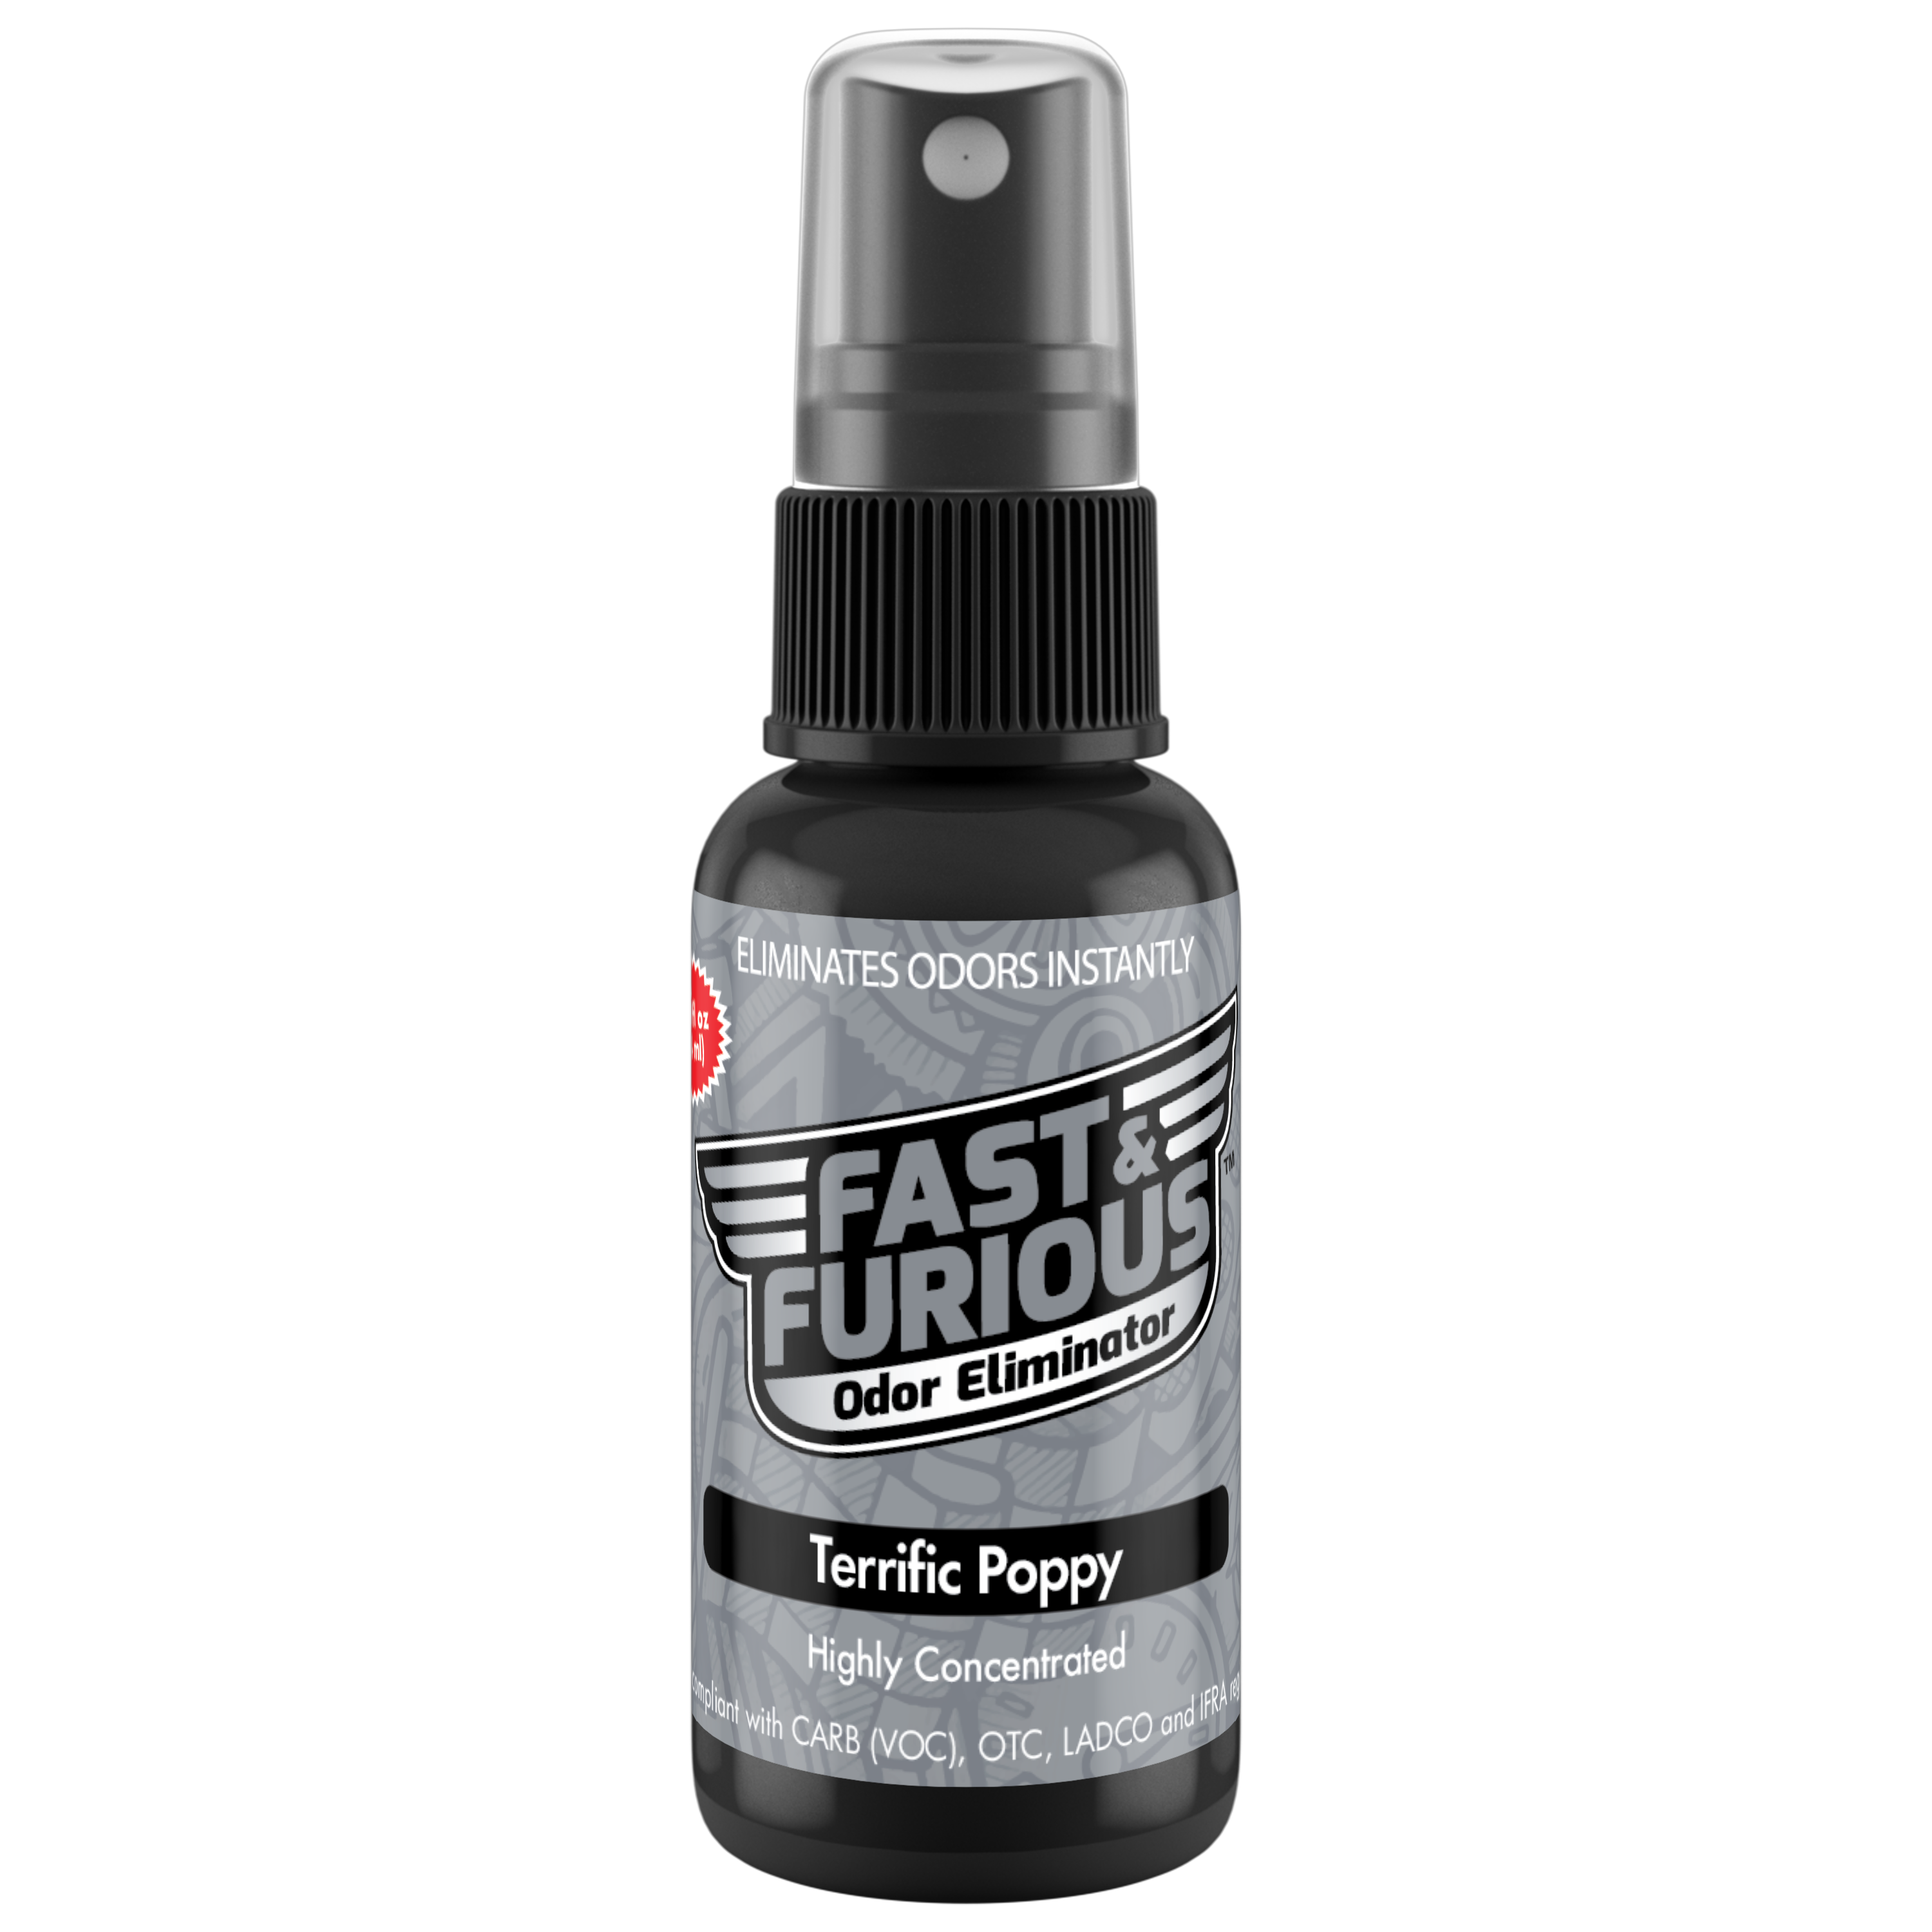 Fast and Furious Odor Eliminator - Terrific Poppy Scent